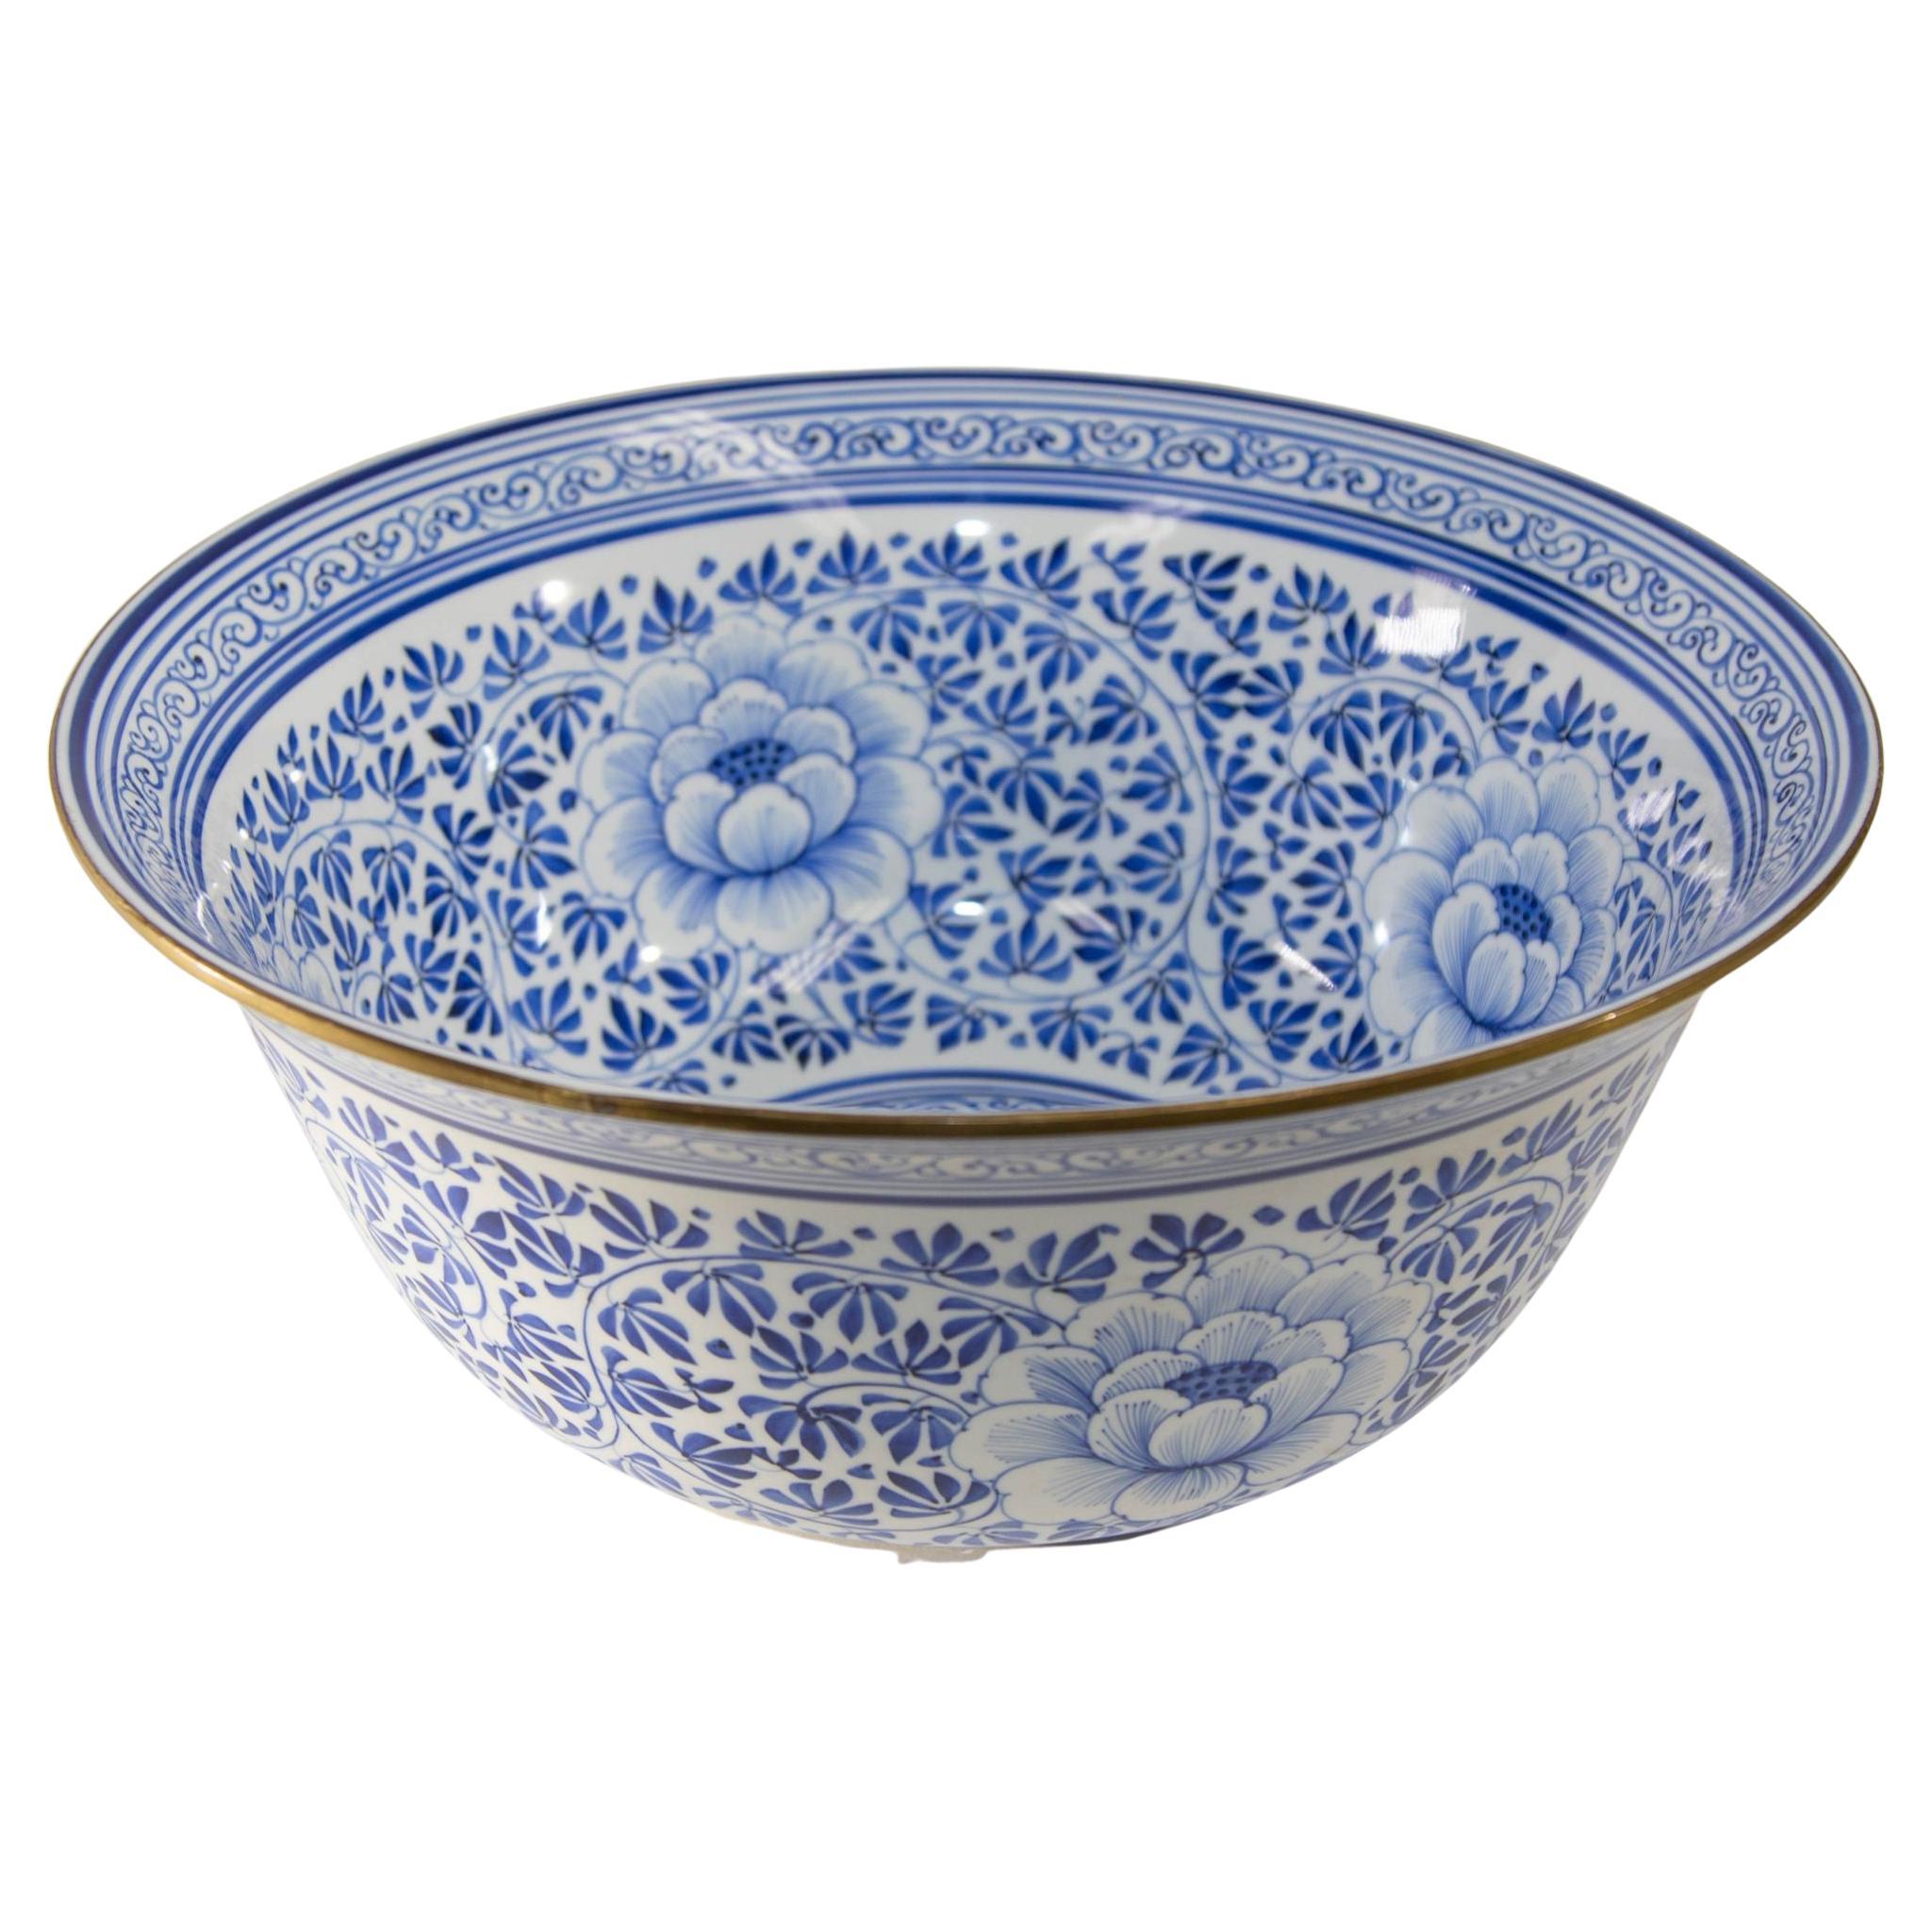 Intricate Blue and White Vine Motif Japanese Cereal Bowl Set for Six